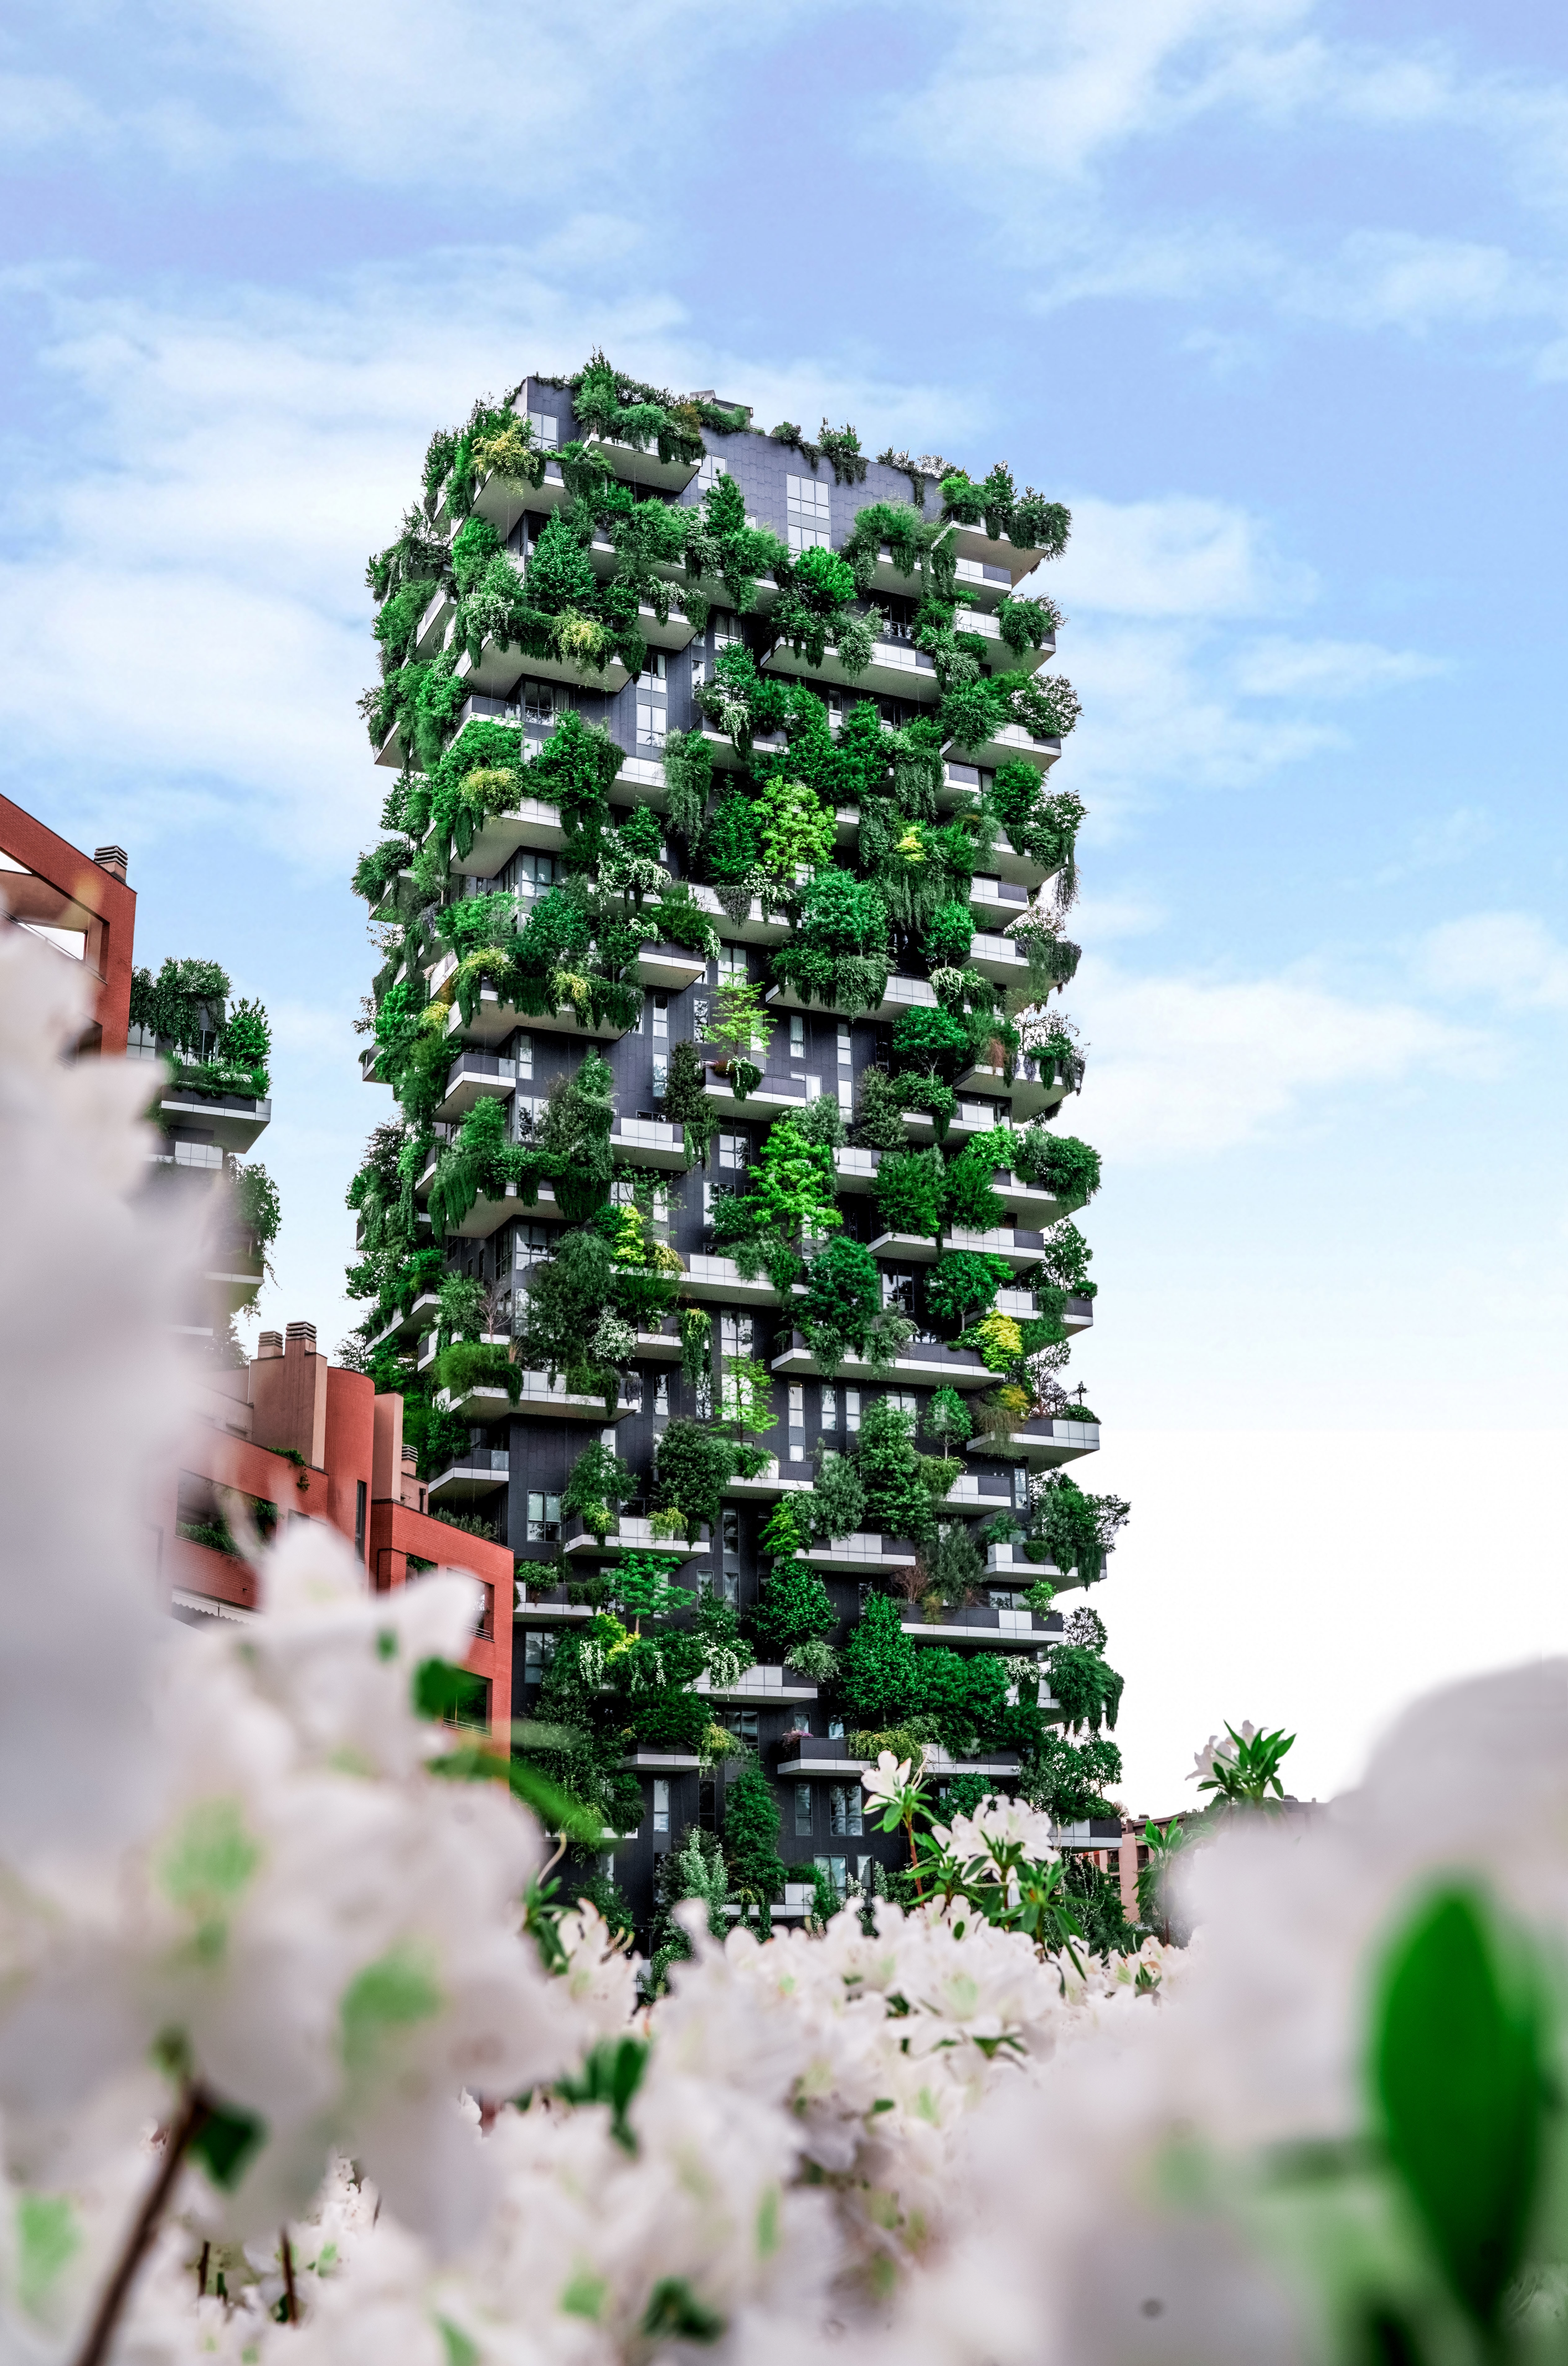 Free HD plants, cities, architecture, building, house, modern, up to date, eco